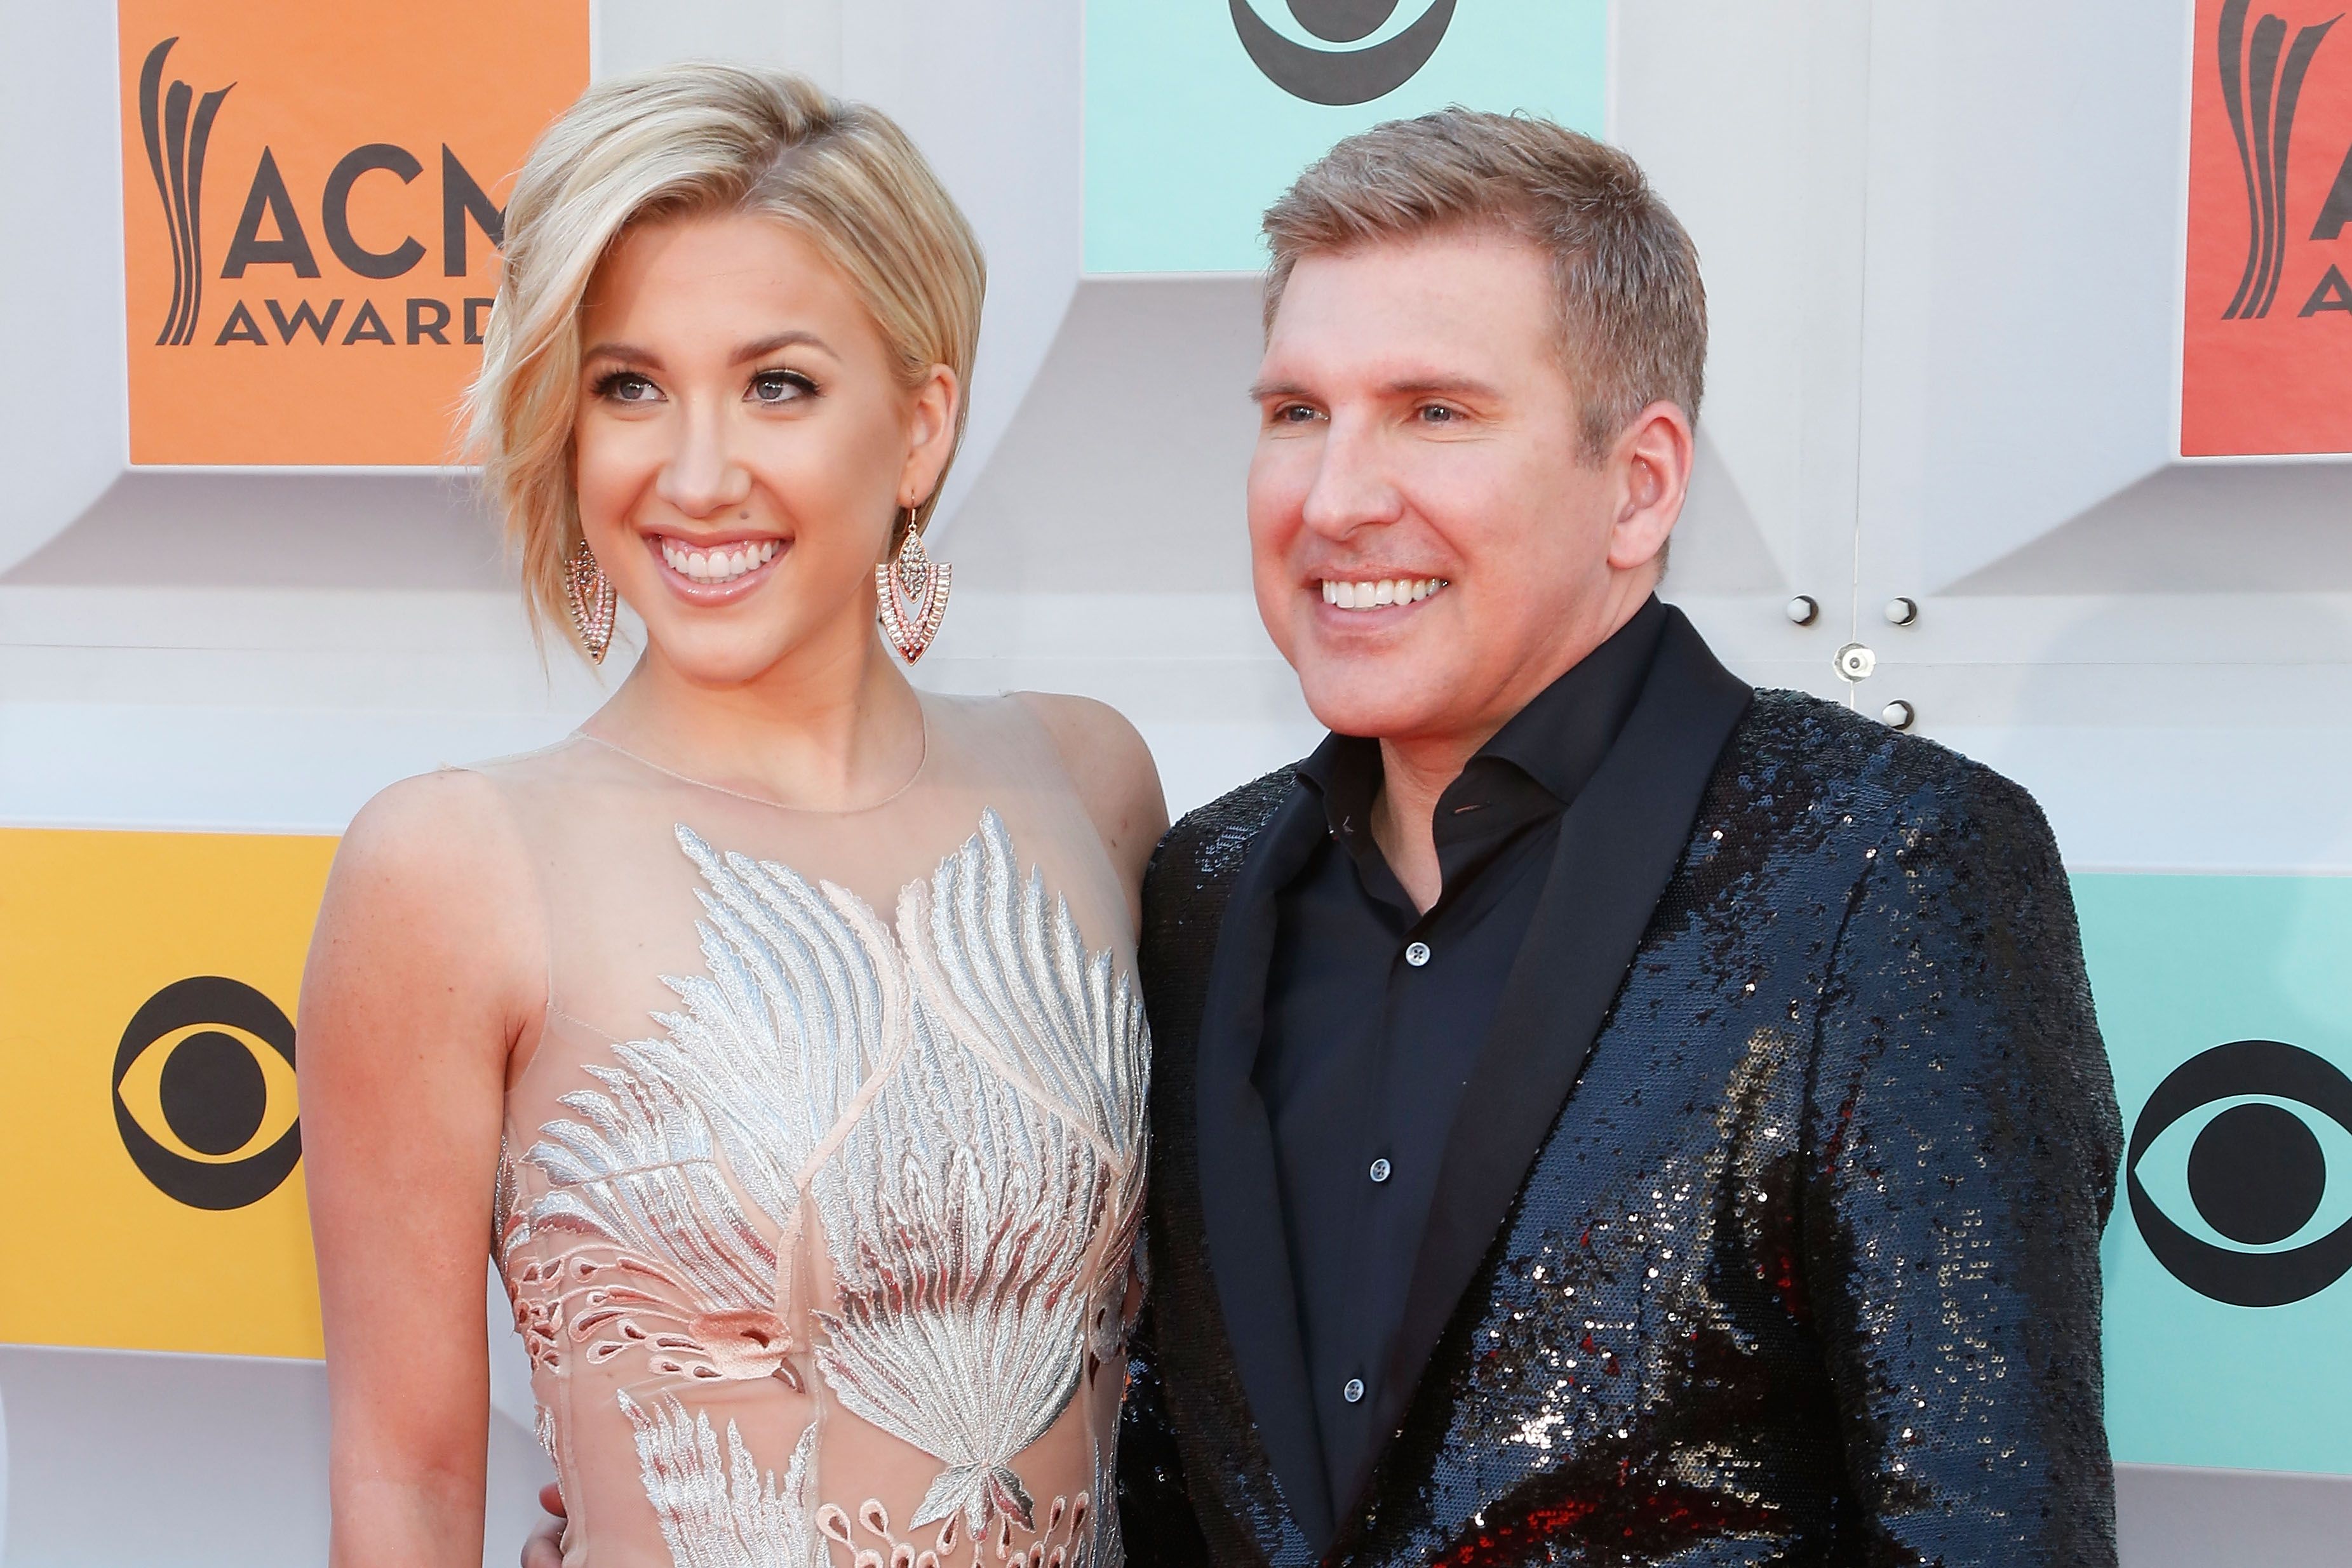 Savannah Chrisley and Todd Chrisley during the 51st Academy of Country Music Awards at MGM Grand Garden Arena on April 3, 2016 in Las Vegas, Nevada. | Source: Getty Images